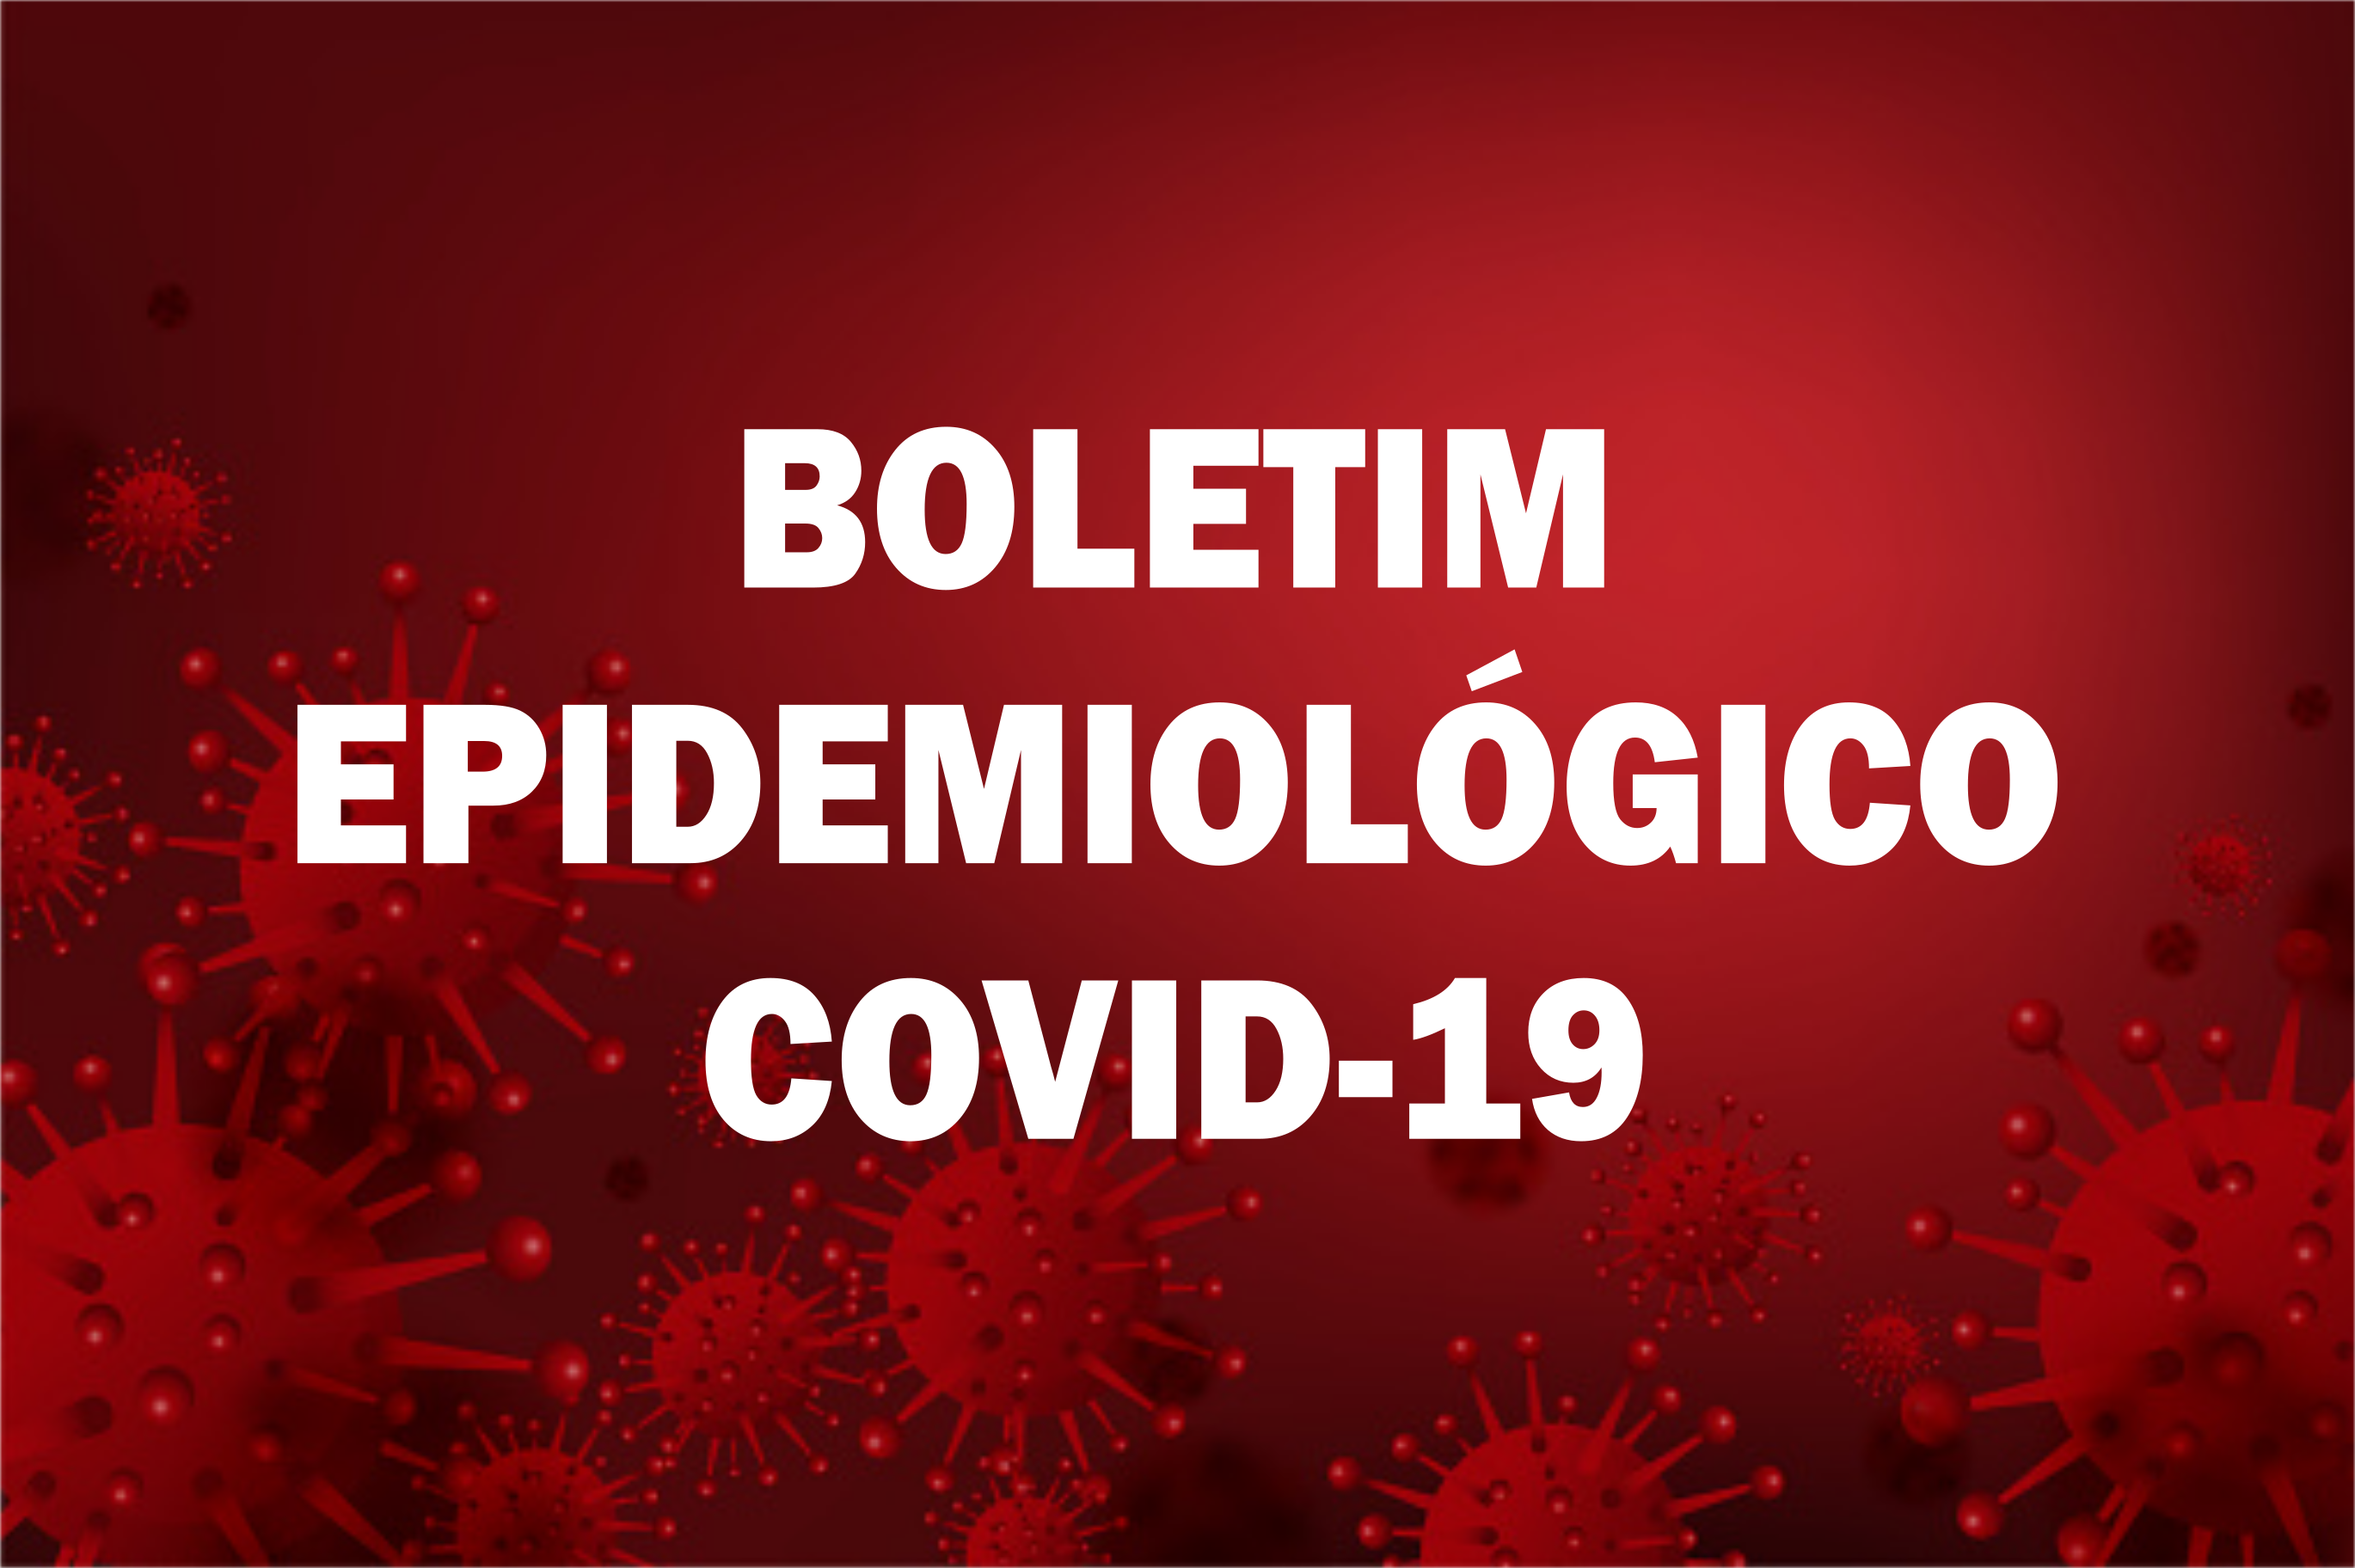 You are currently viewing BOLETIM EPIDEMIOLÓGICO Nº 135 (COVID-19)